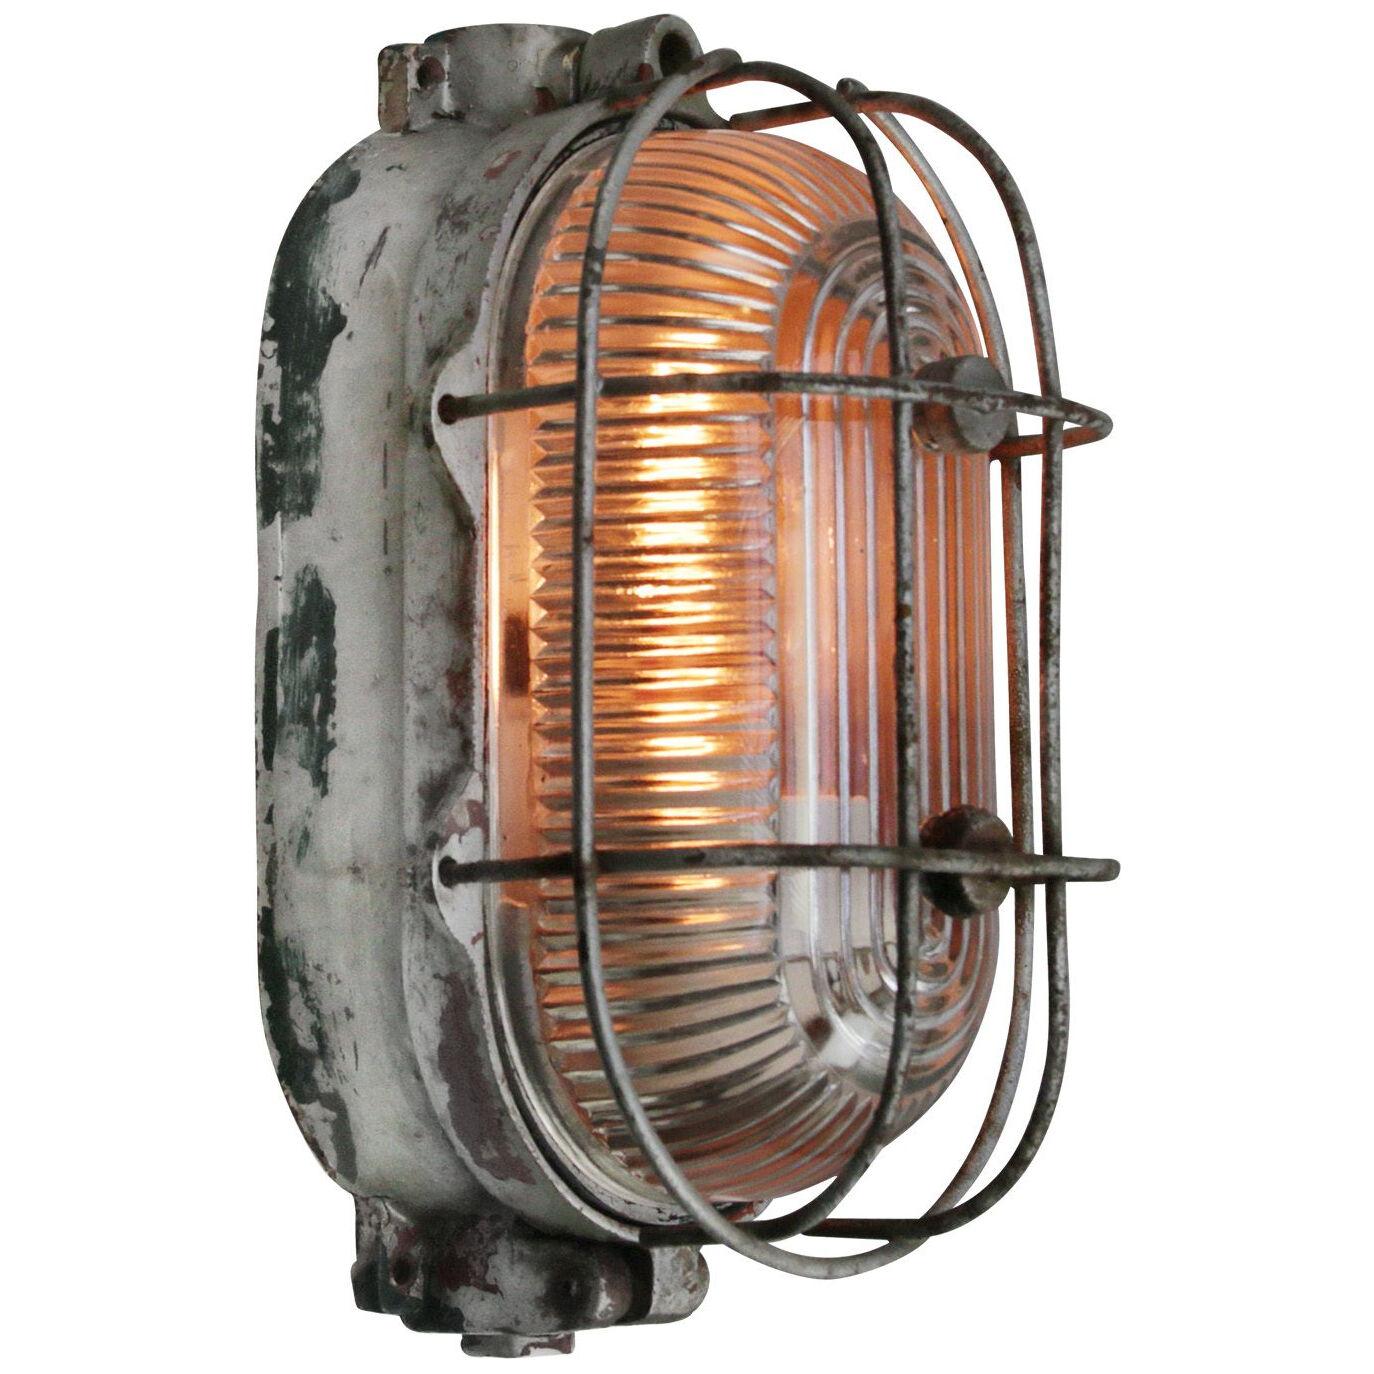 Cast Iron Vintage Industrial Holophane Striped Glass Wall Lamps Scones